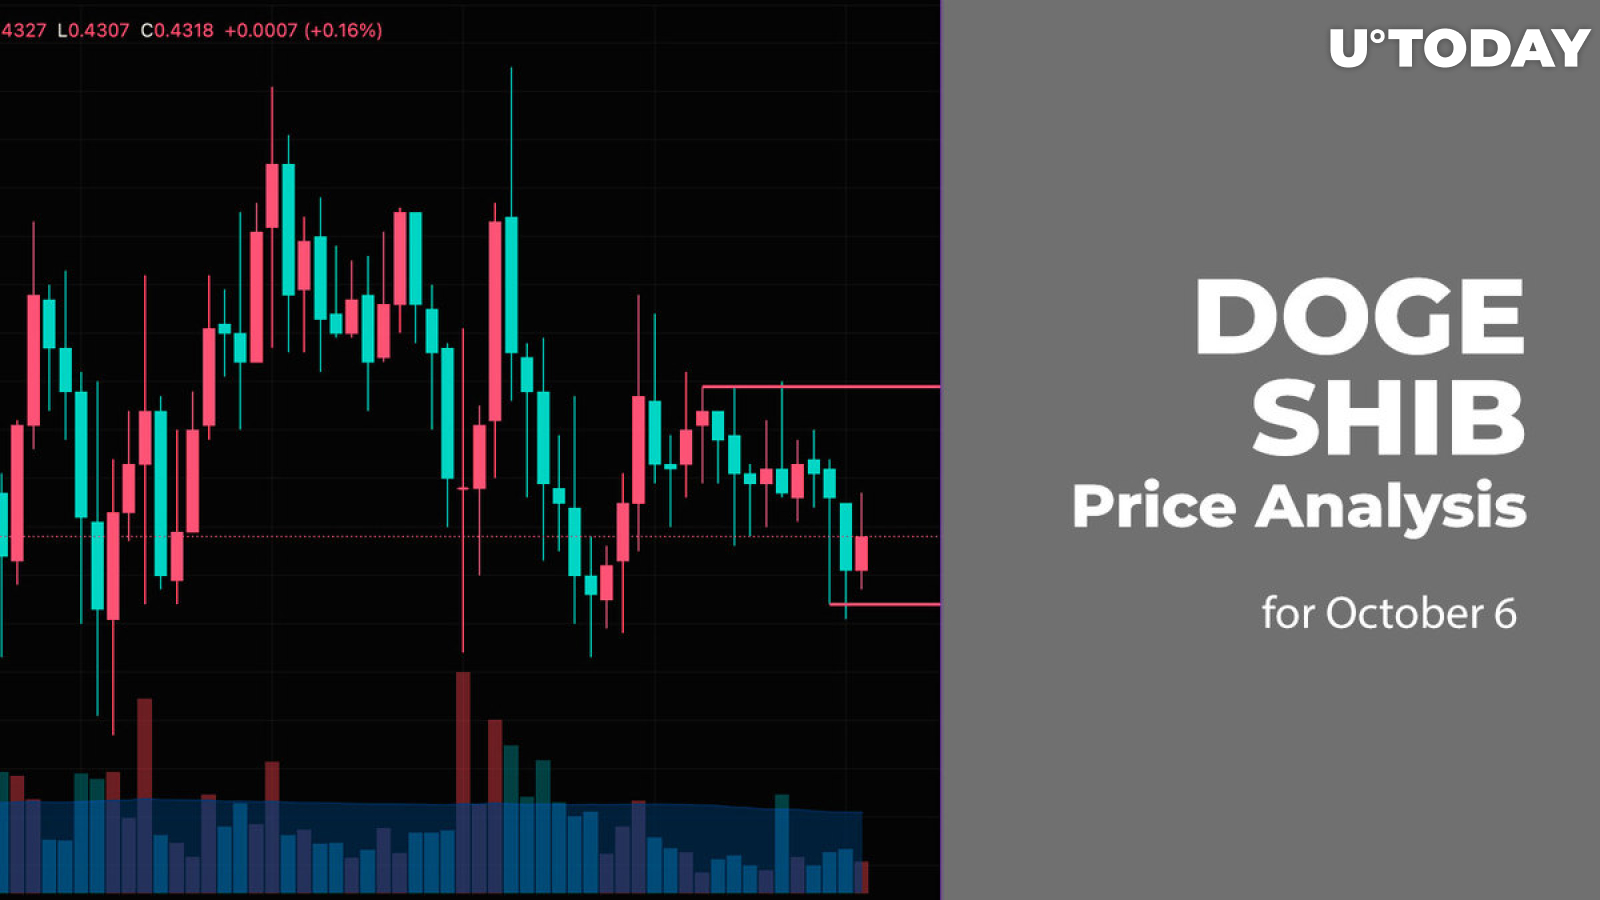 DOGE and SHIB Price Analysis for October 6